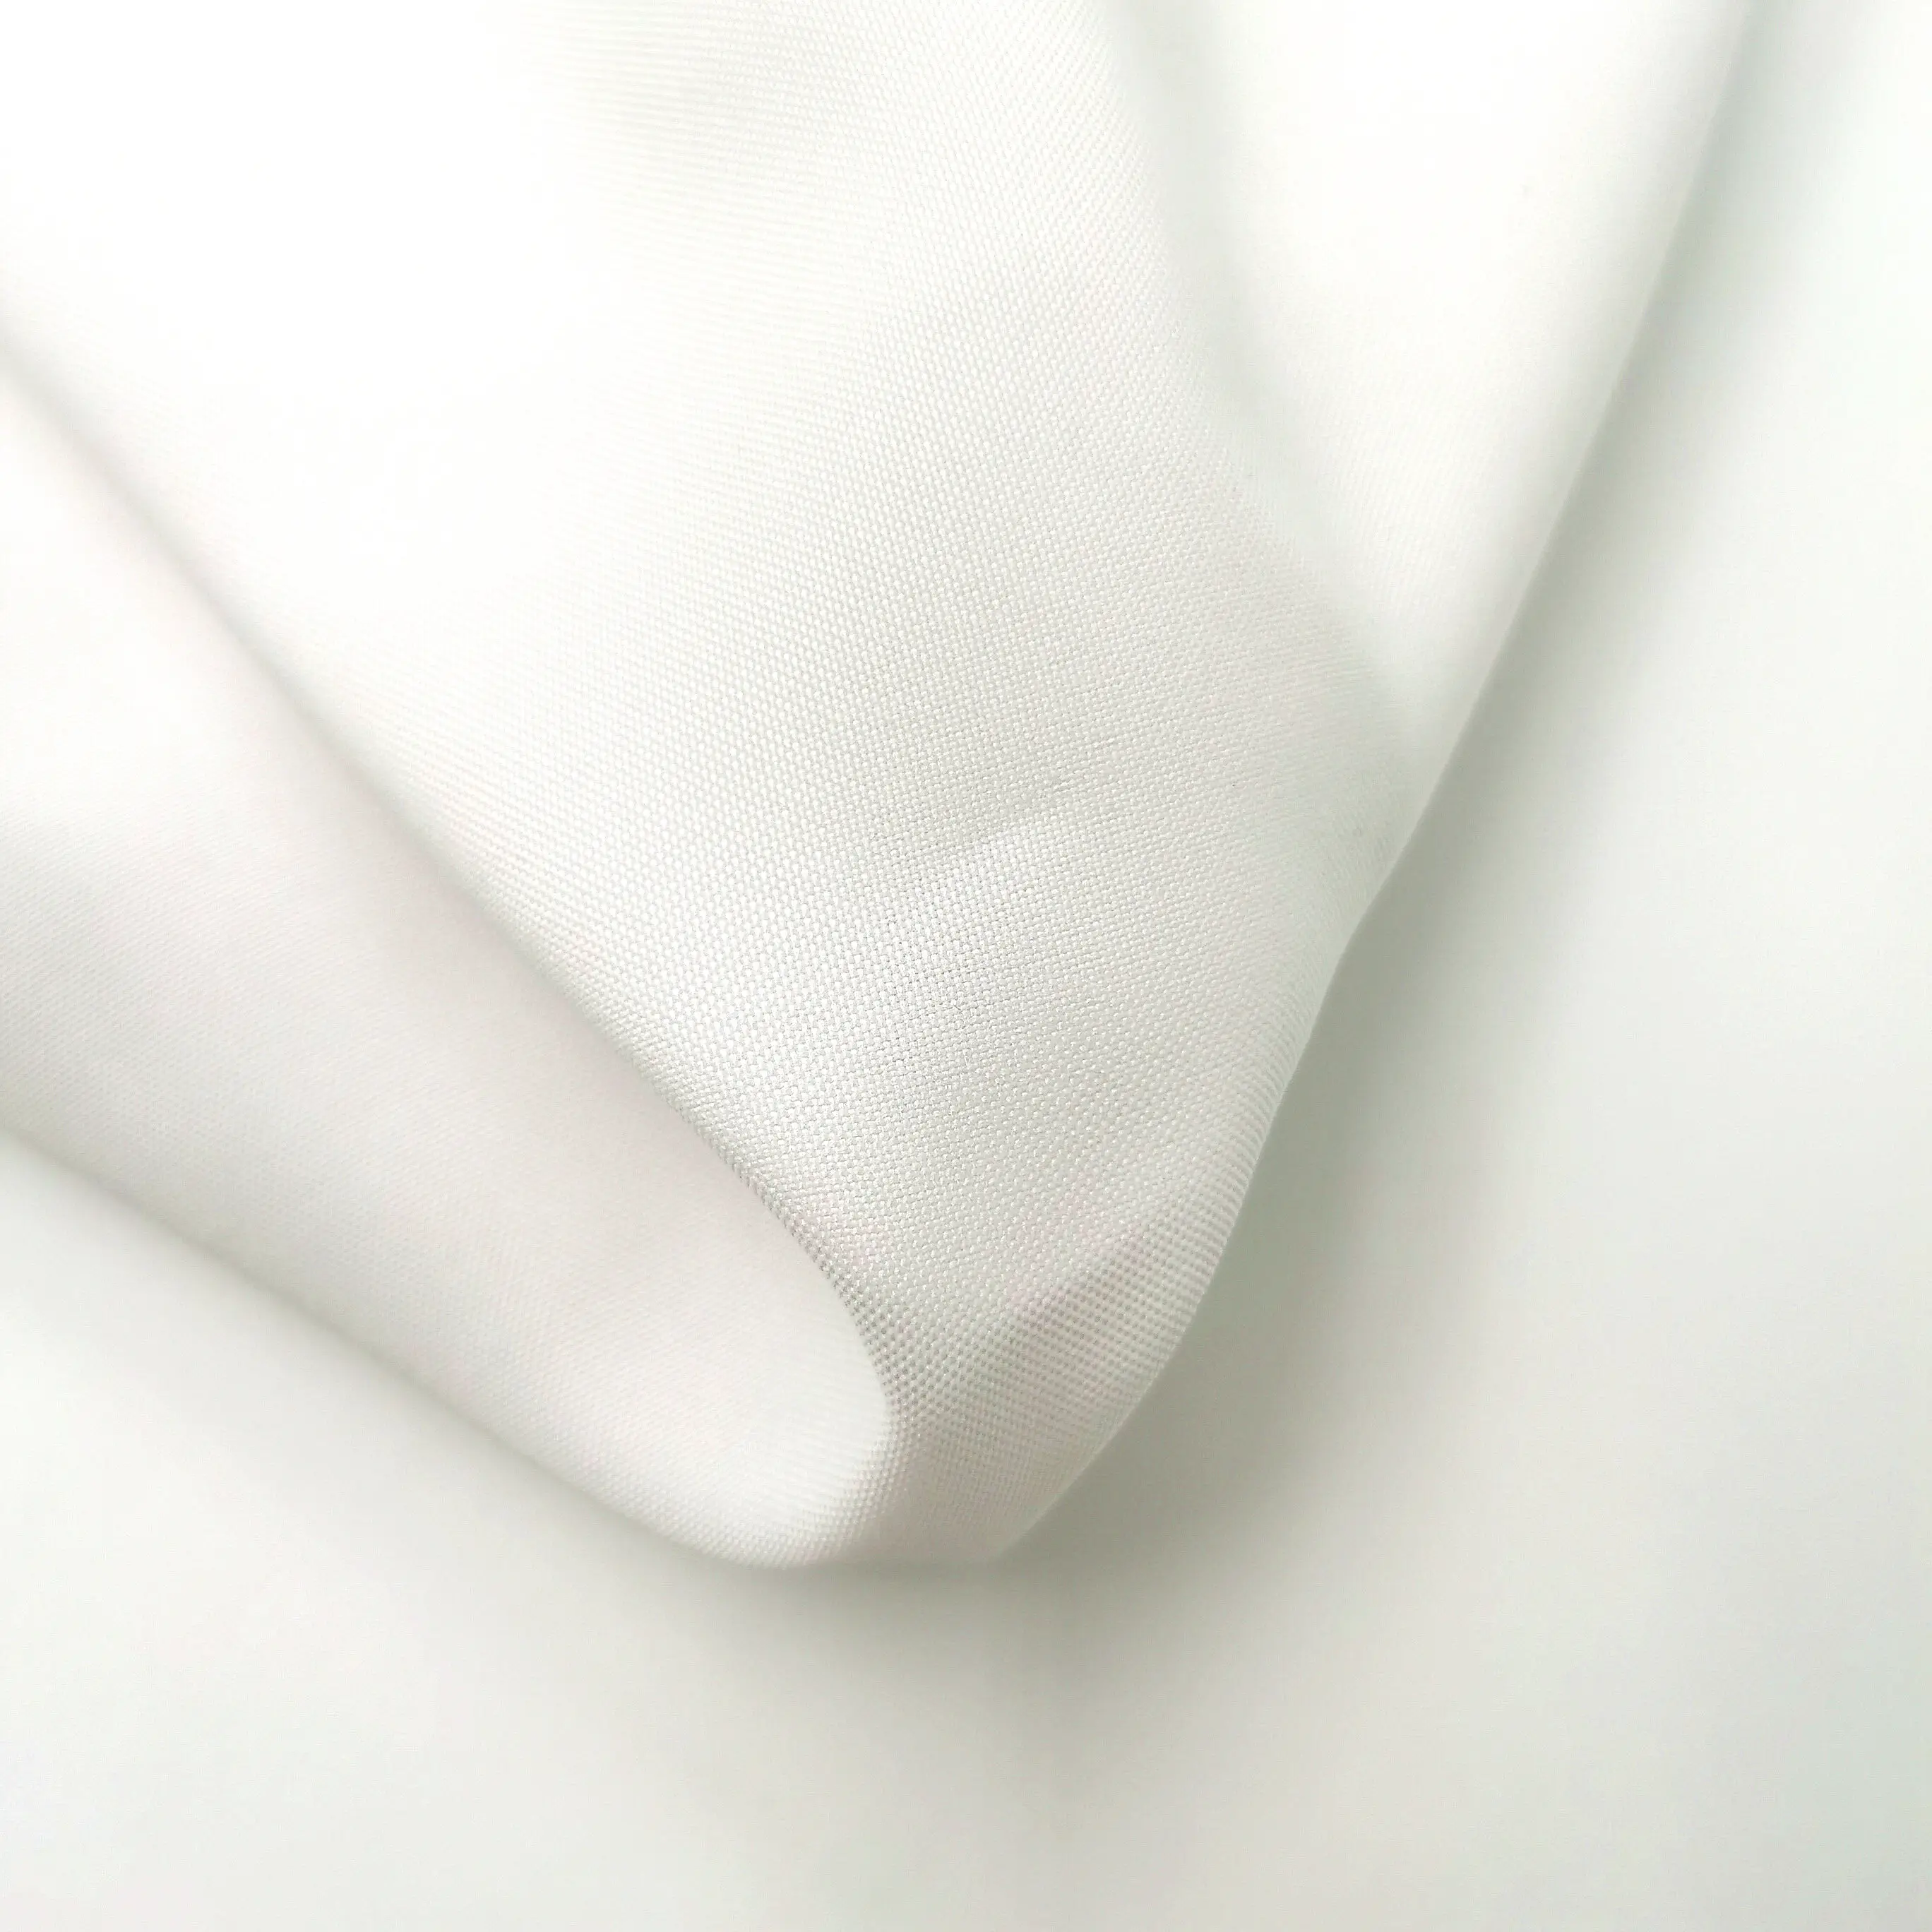 Sublimation Printing Fabrics Factory Wholesale White Blank Polyester Poplin 600D Fabric For Sublimation Printing